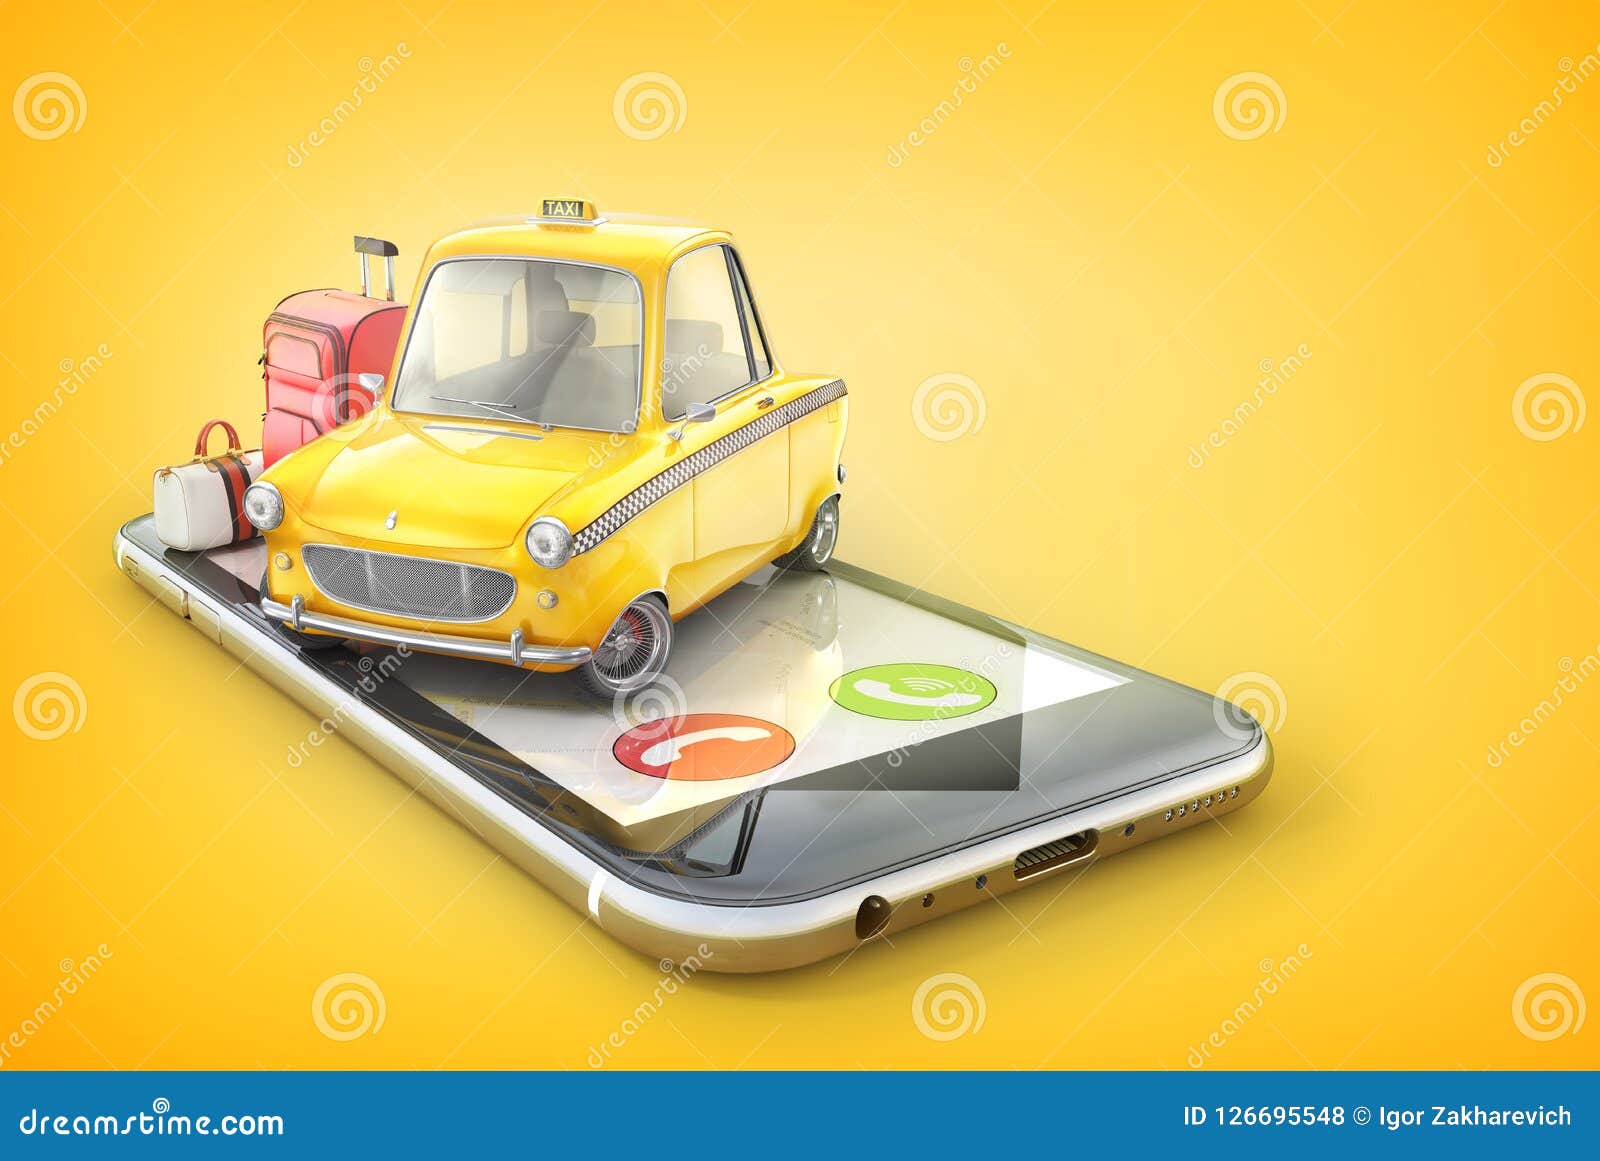 yellow retro taxi car on the phone screen on a yel